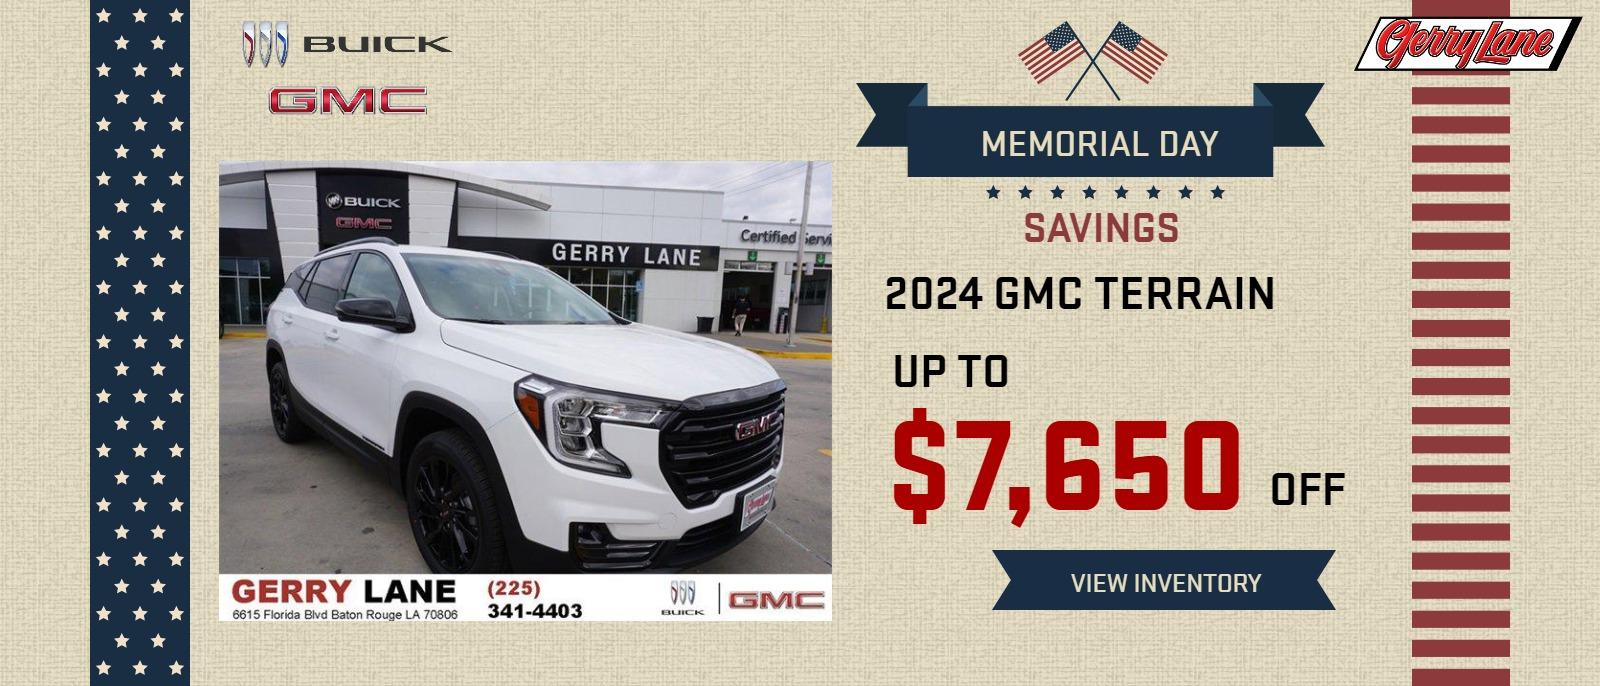 2024 Terrain 
Up to $7650 Off